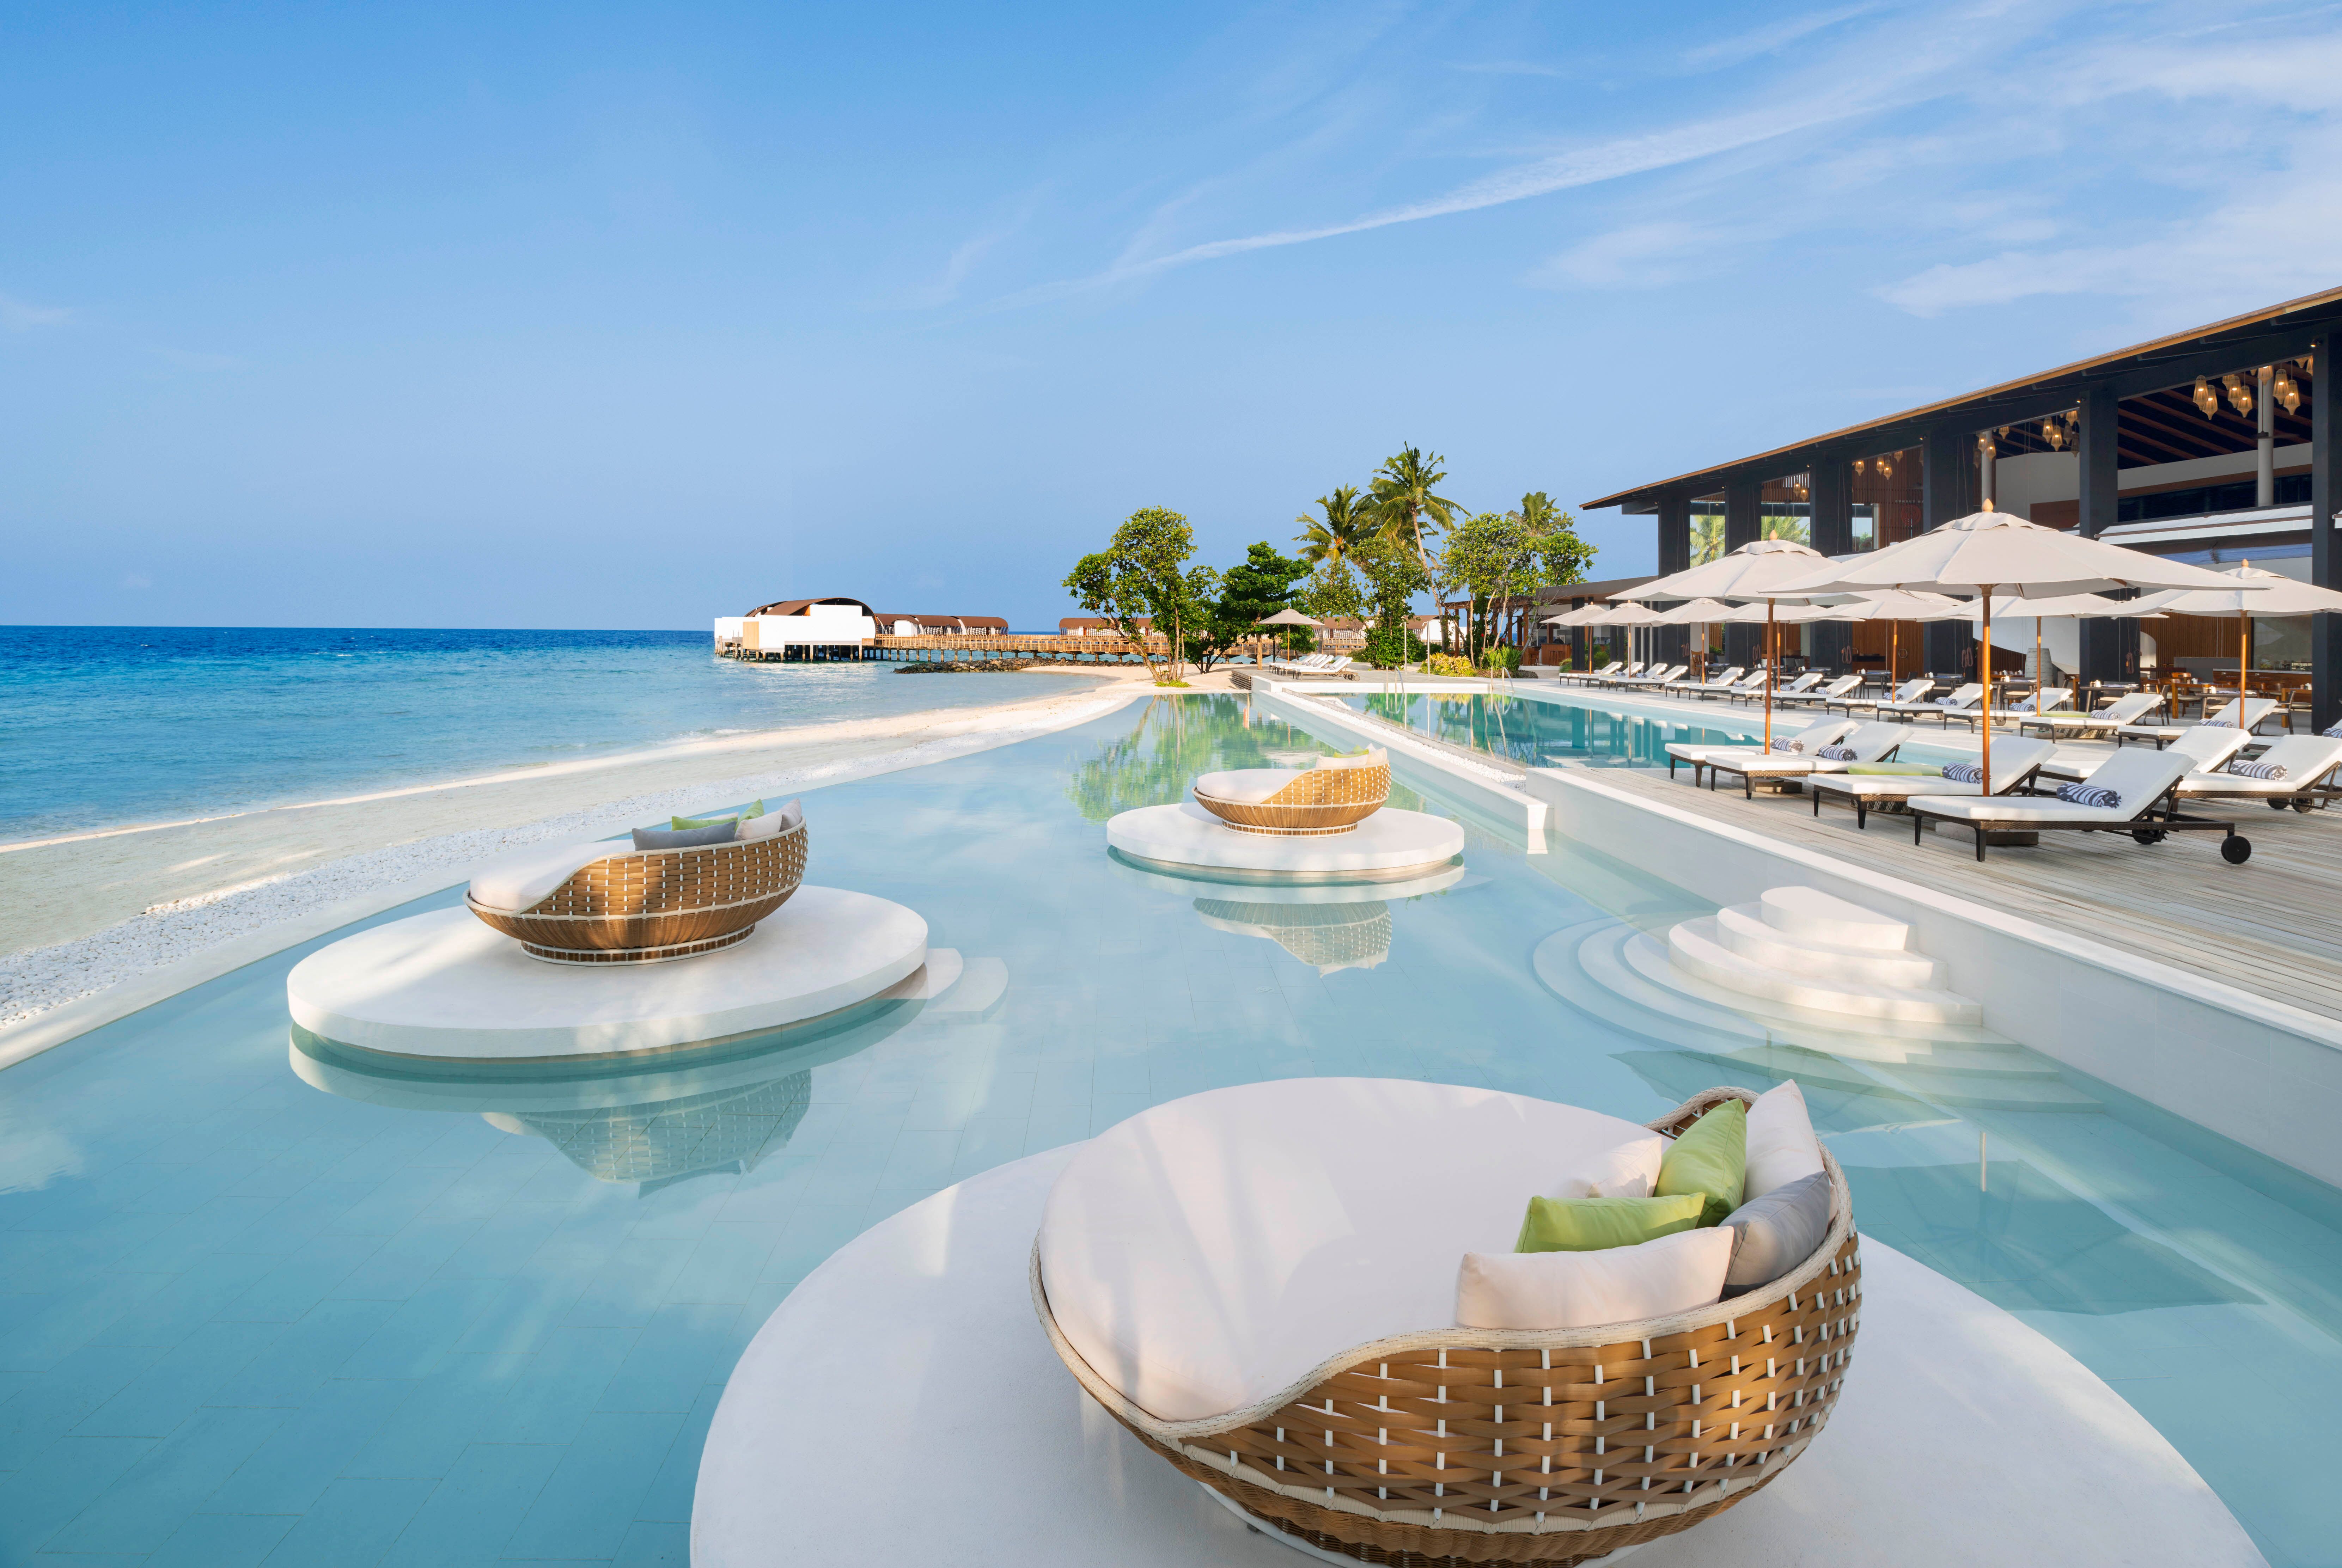 THE WESTIN MALDIVES MIRIANDHOO RESORT OFFERS ULTIMATE WELLNESS ON THE TROPICAL ARCHIPELAGO OASIS